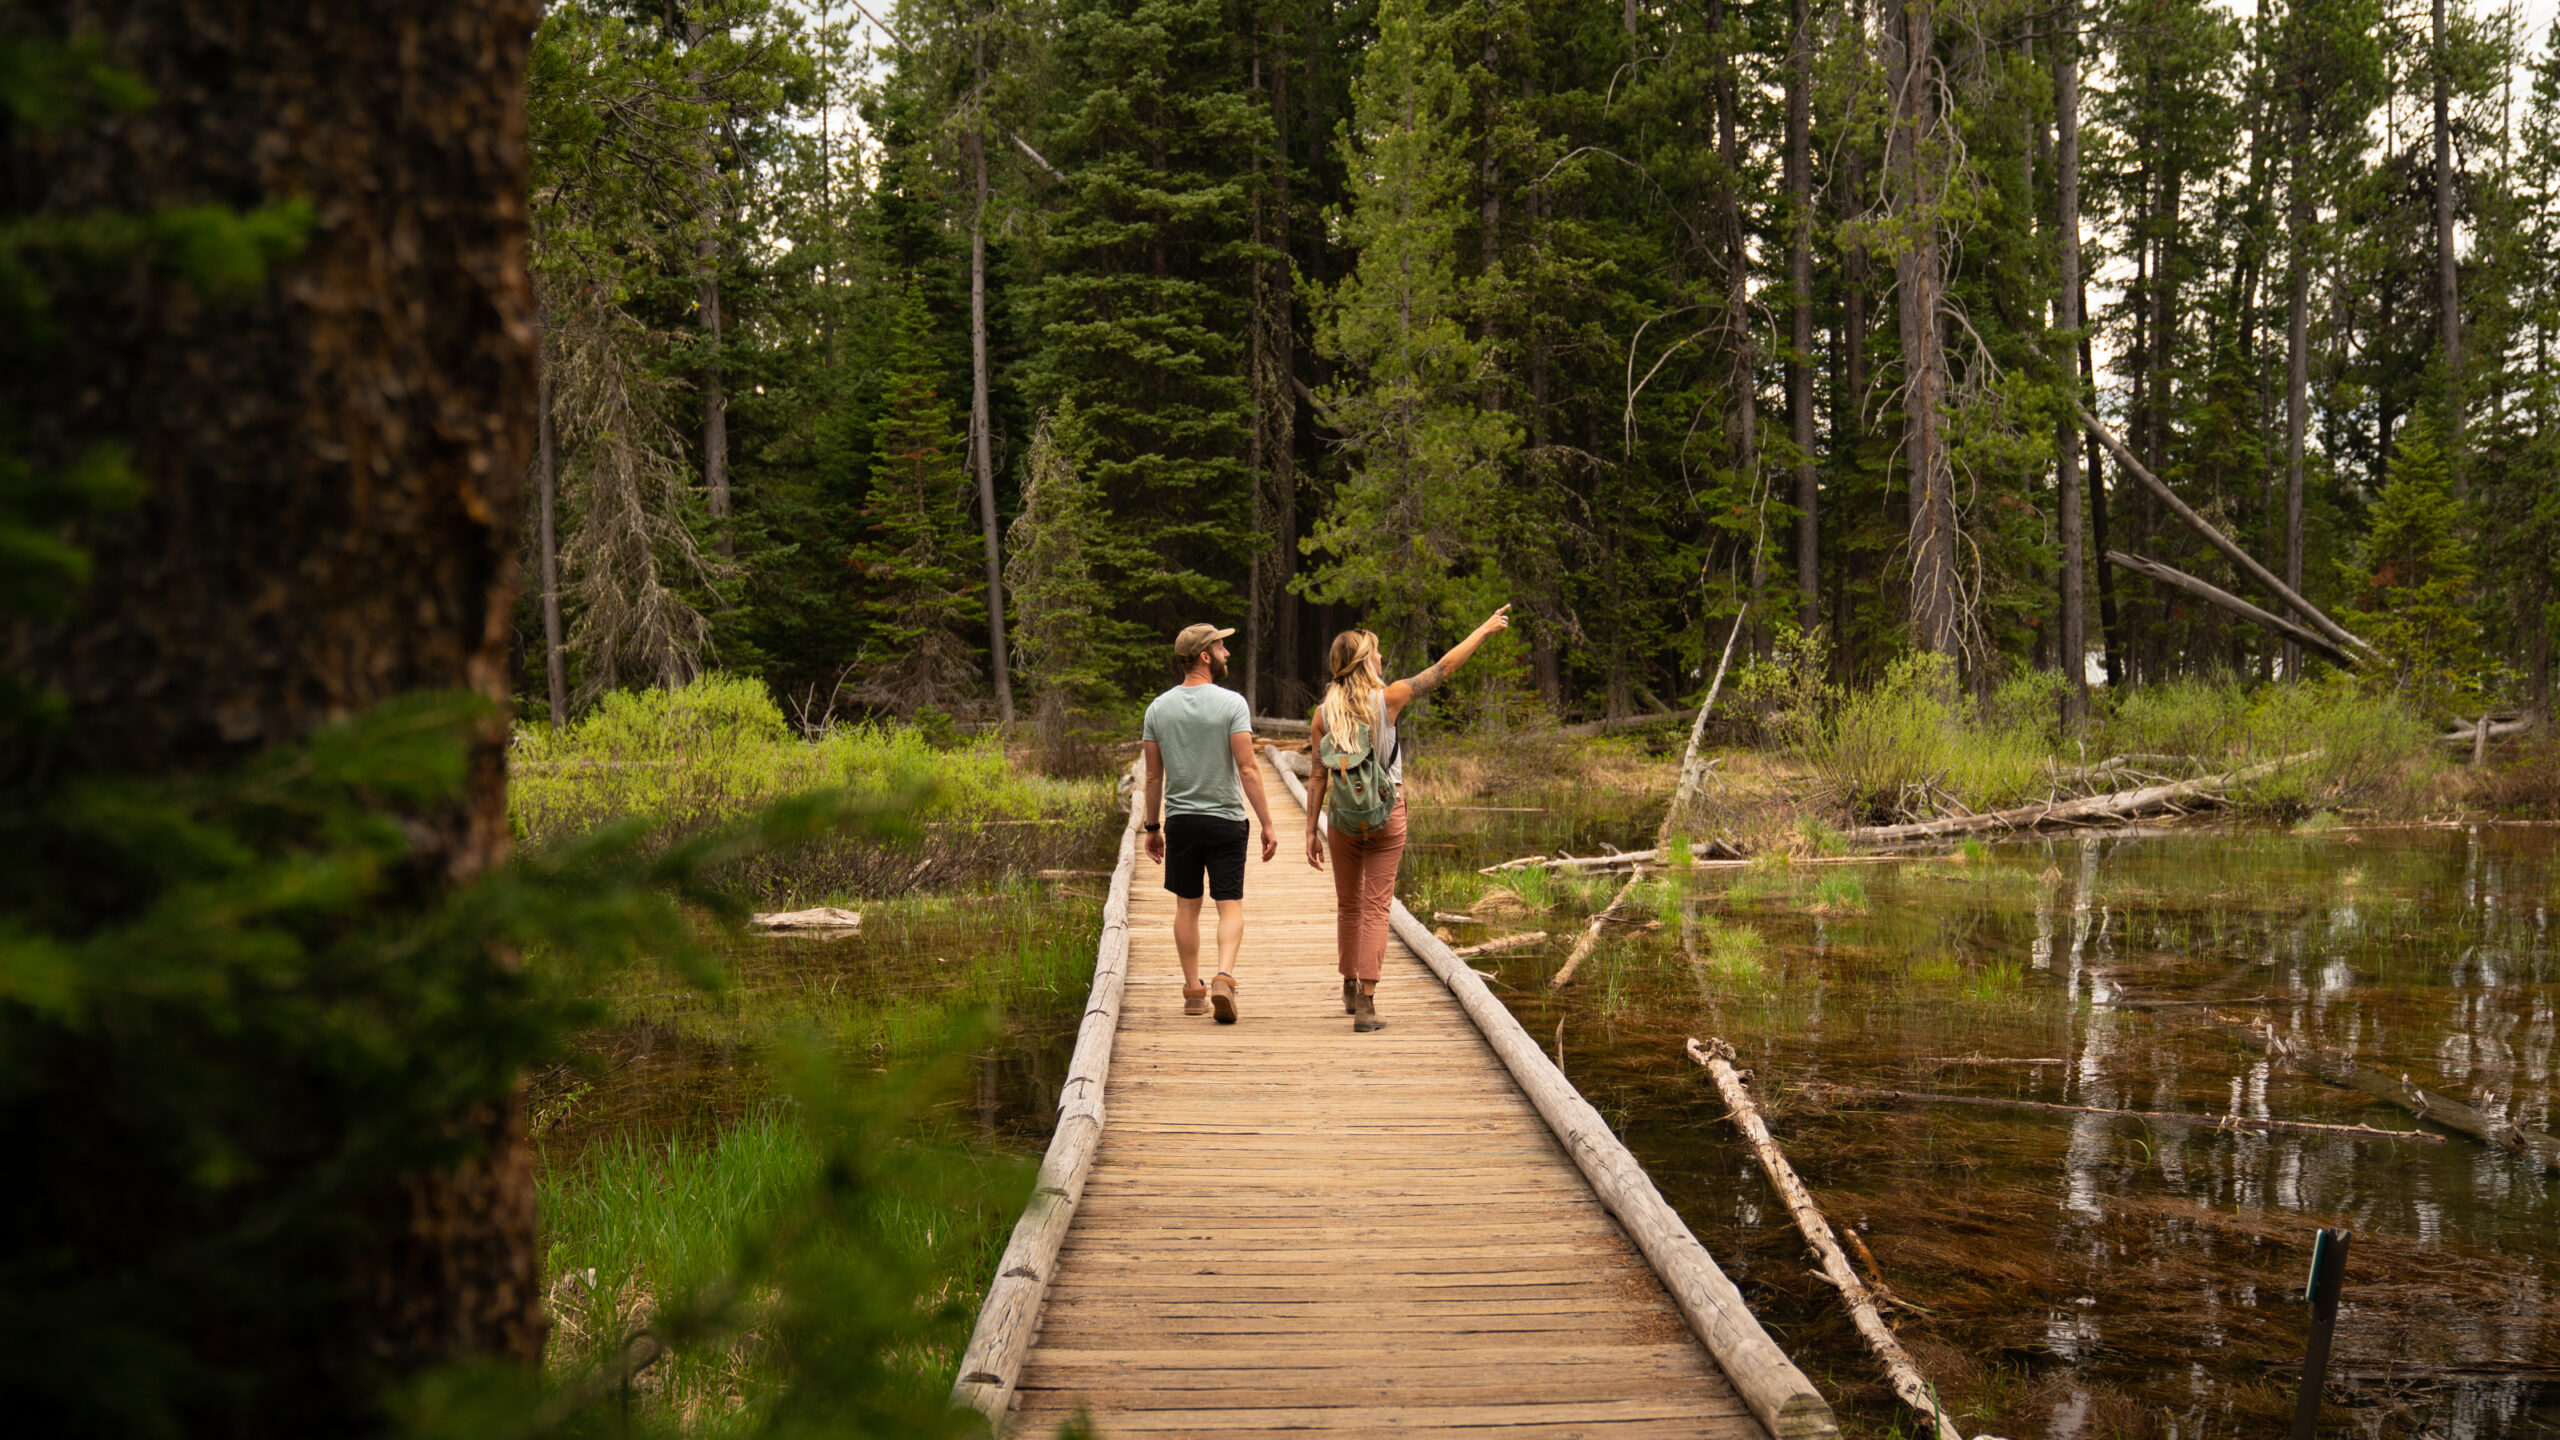 A guy and a girl travel on a ranch by the pond, admiring green forest scenery.